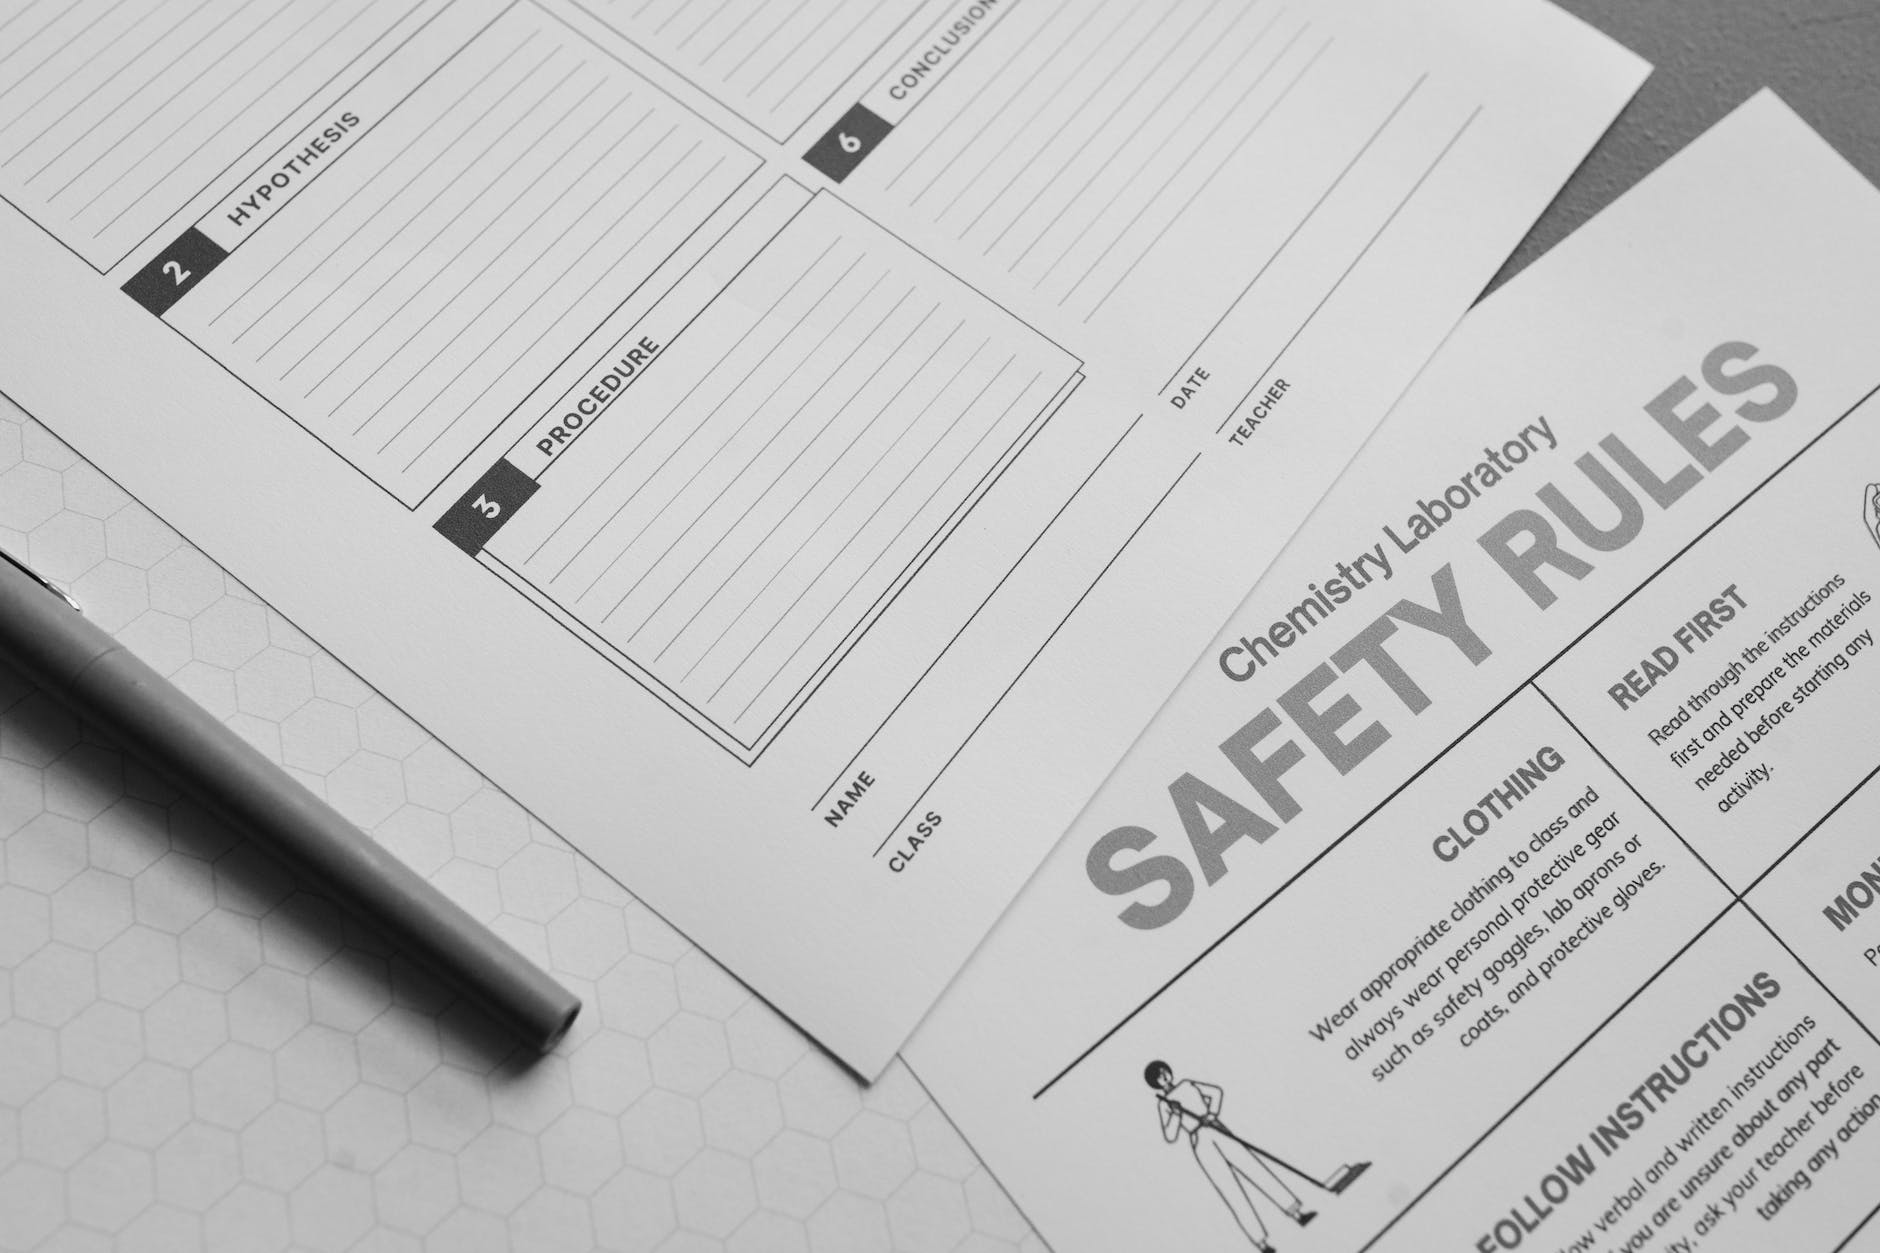 a diagnosis form on a chemistry laboratory safety rules guidelines